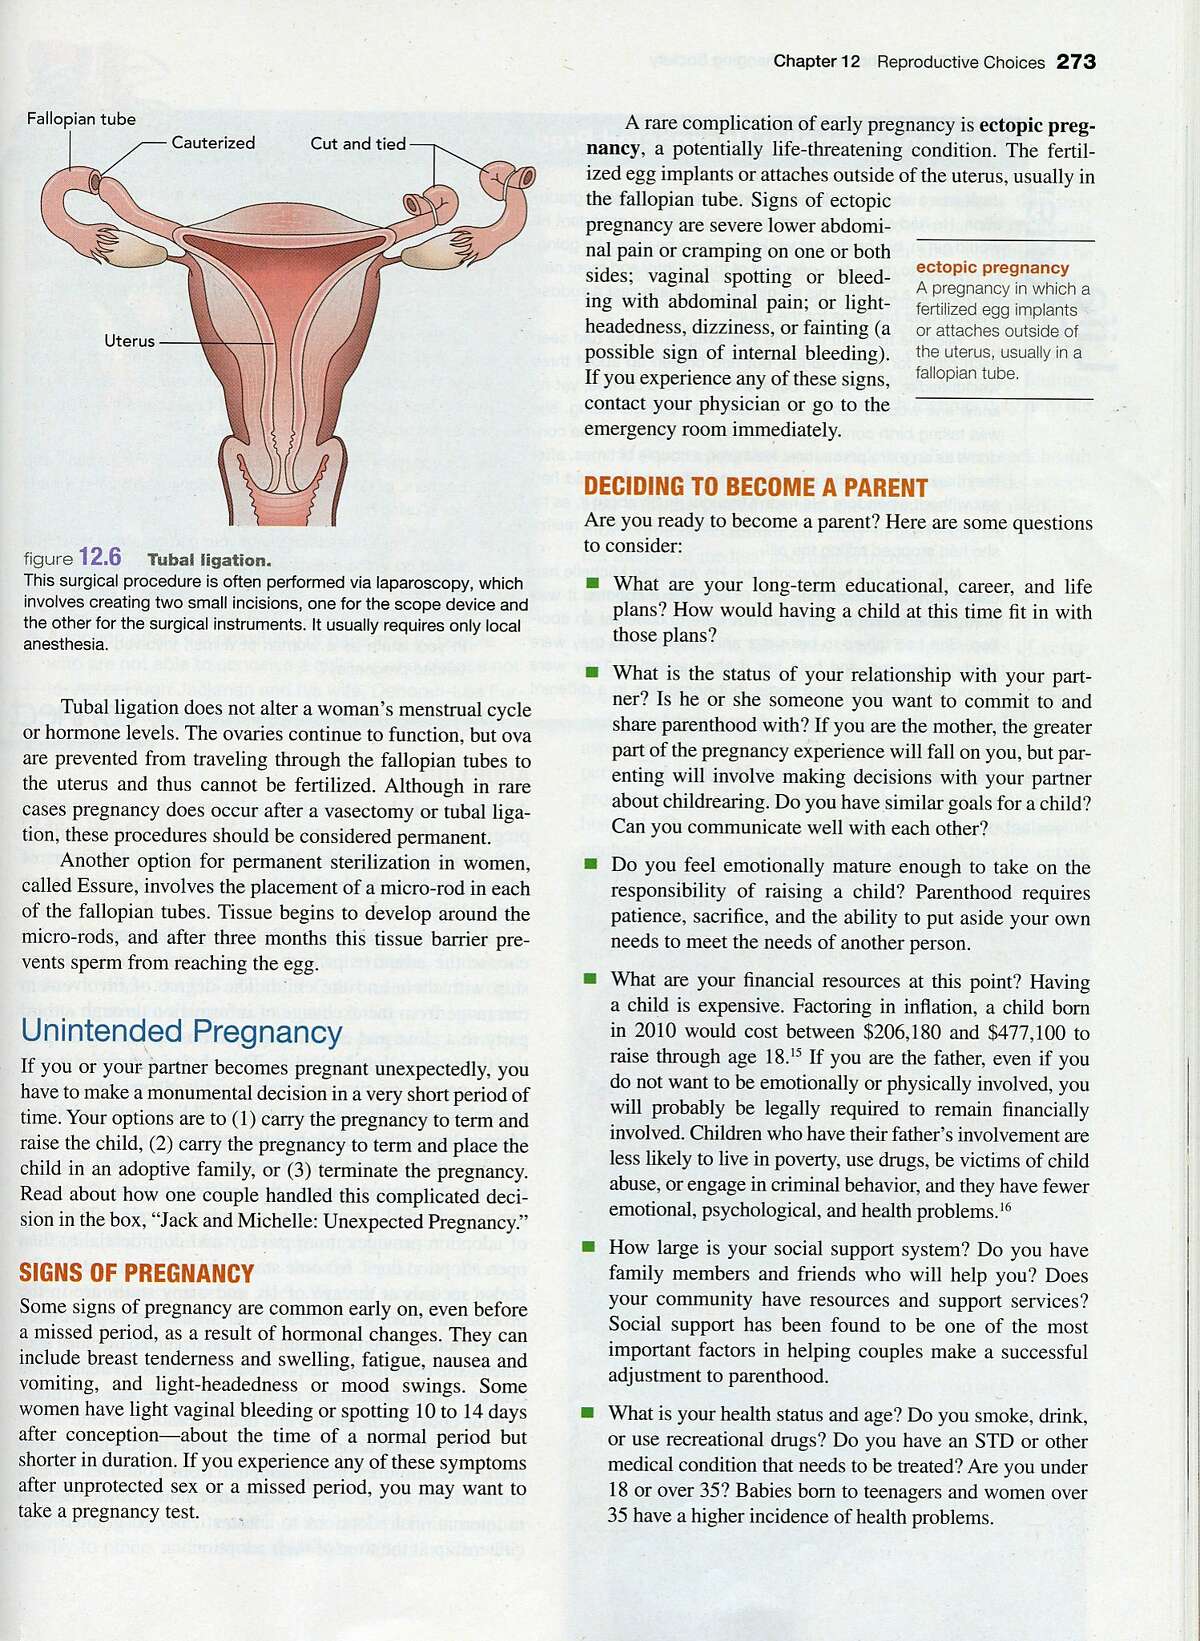 An example page from the textbook "Your Health Today" published by McGraw Hill. The book is causing controversy among parents in the Fremont Unified School District, where it is slated to be taught to their ninth-grade students. The parents say the book's diagrams and explicit descriptions are inappropriate for high school students.